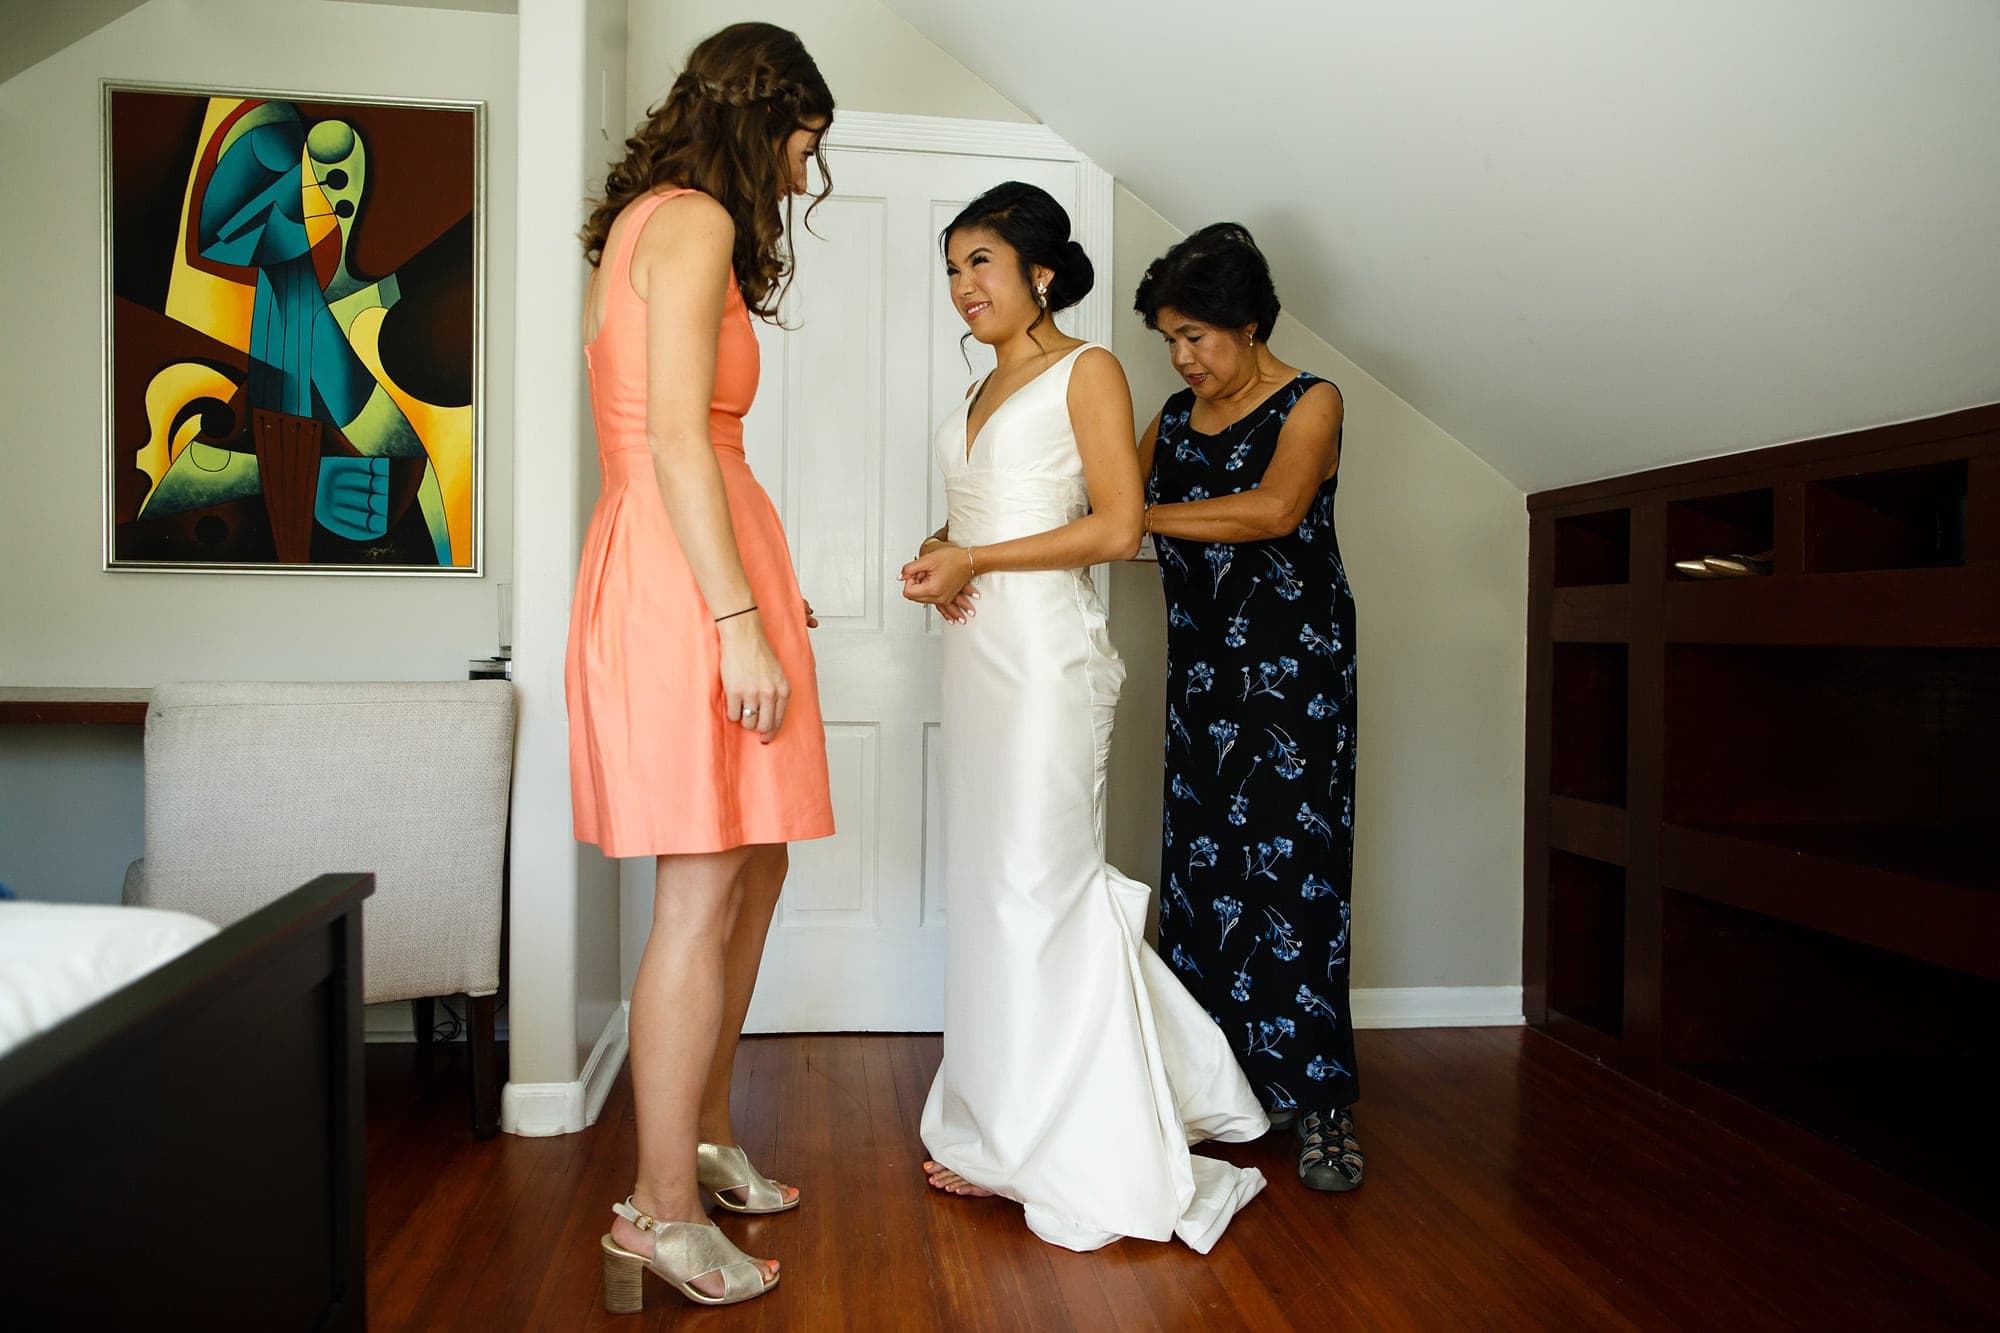 The bride gets into her wedding dress with help from her mother and maid of honor at an Air BnB home in Boulder, Colorado